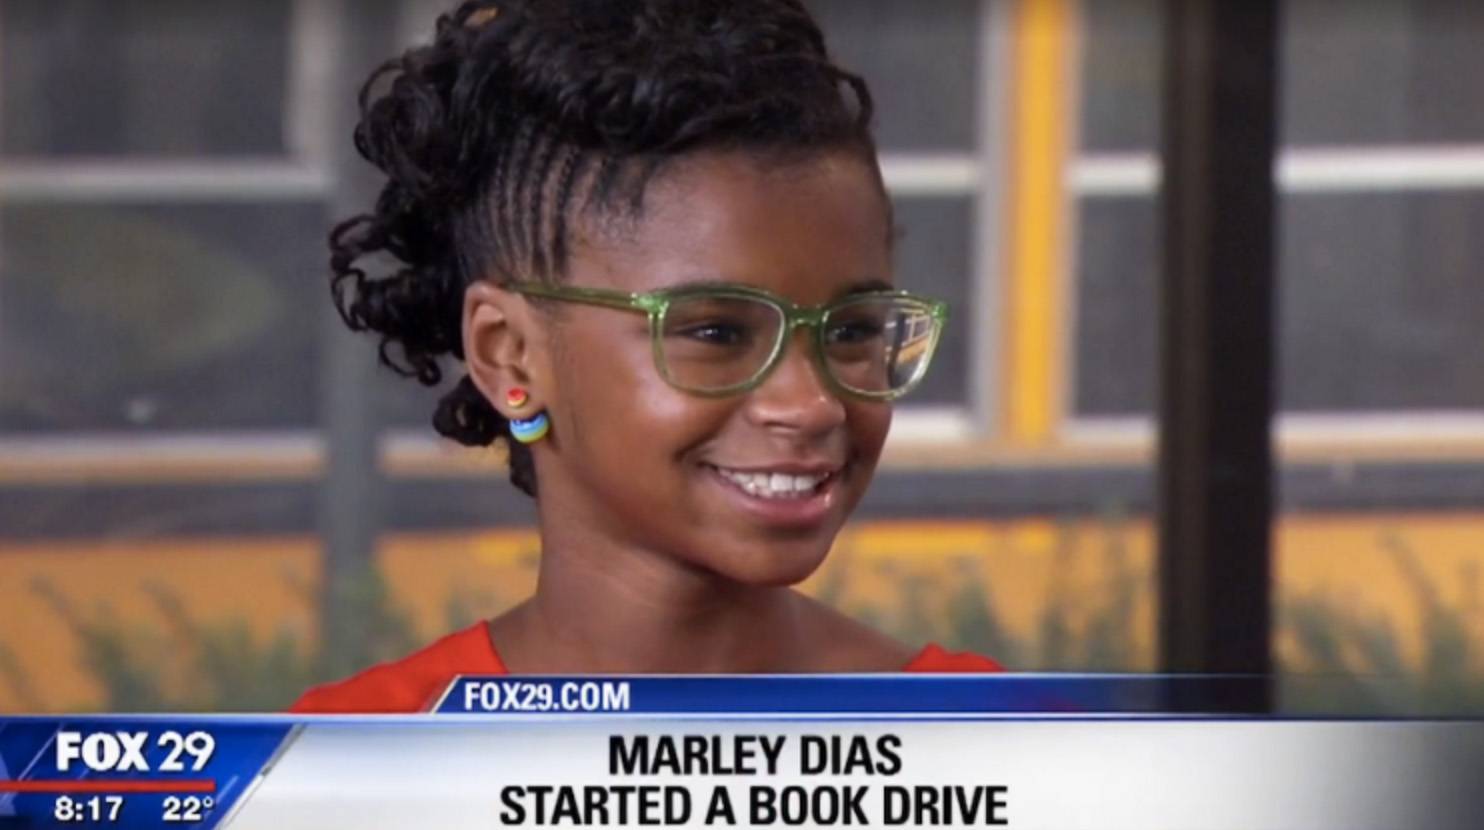 #1000BlackGirlBooks - Marley Davis, an 11-year-old lover of books, was over reading literature about “white boys and dogs,” according to FOX29.&nbsp; She is currently collecting books with Black girls as main characters for a drive. Her goal is to collect 1000 books by Feb. 1 and so far she has collected 400 books. This has inspired us to take a look at 15 books with Black girl protagonists that everyone should know.(Photo: FOX)